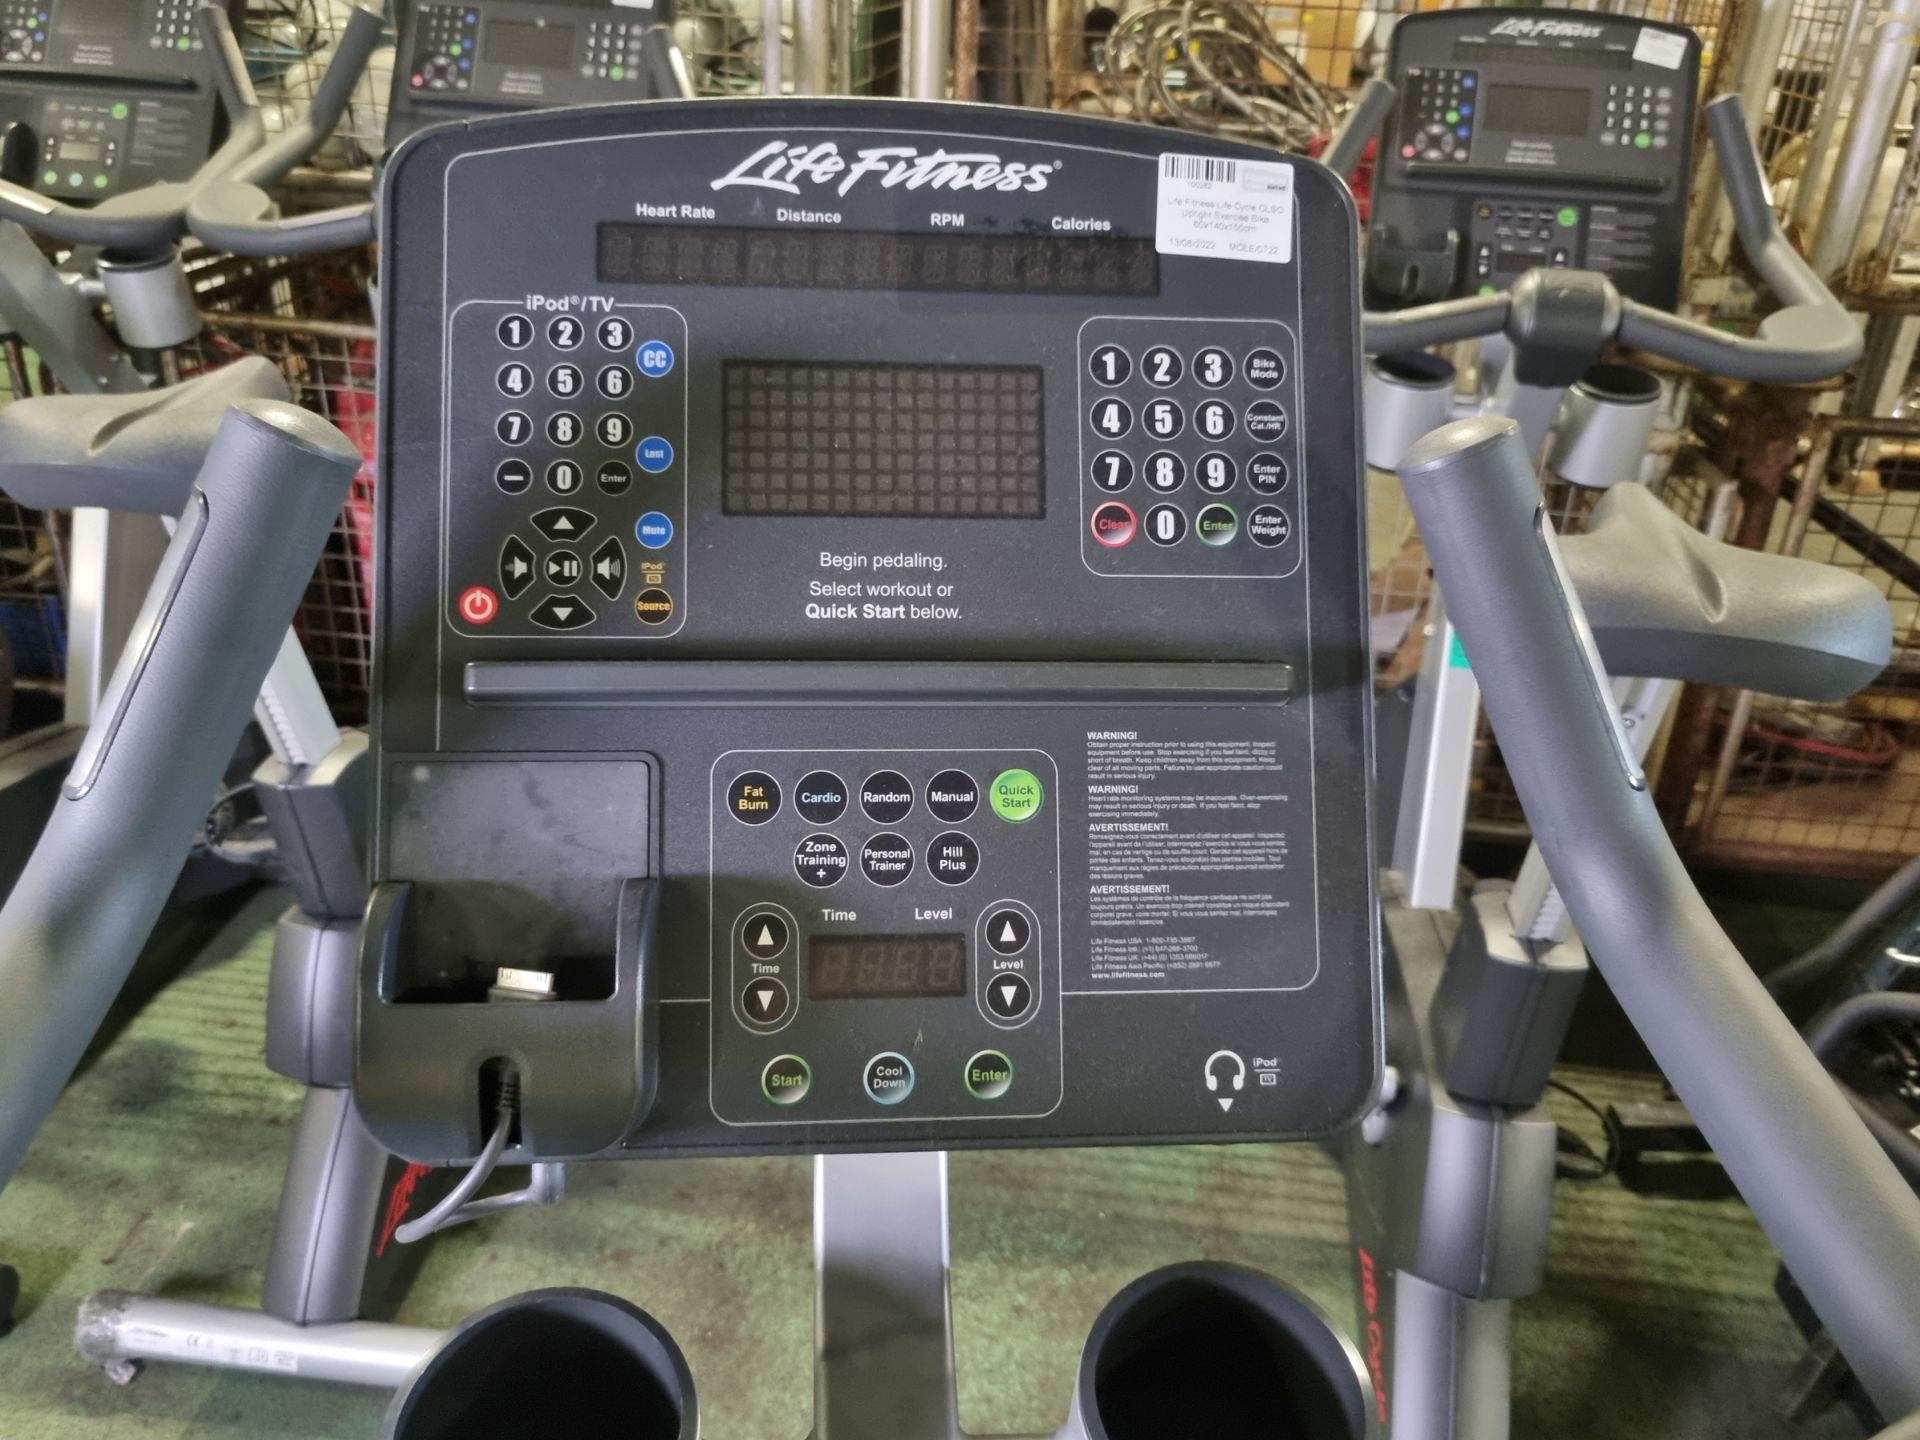 Life Fitness Life Cycle CLSC Upright Exercise Bike 60 x 140 x 150cm - Image 4 of 5